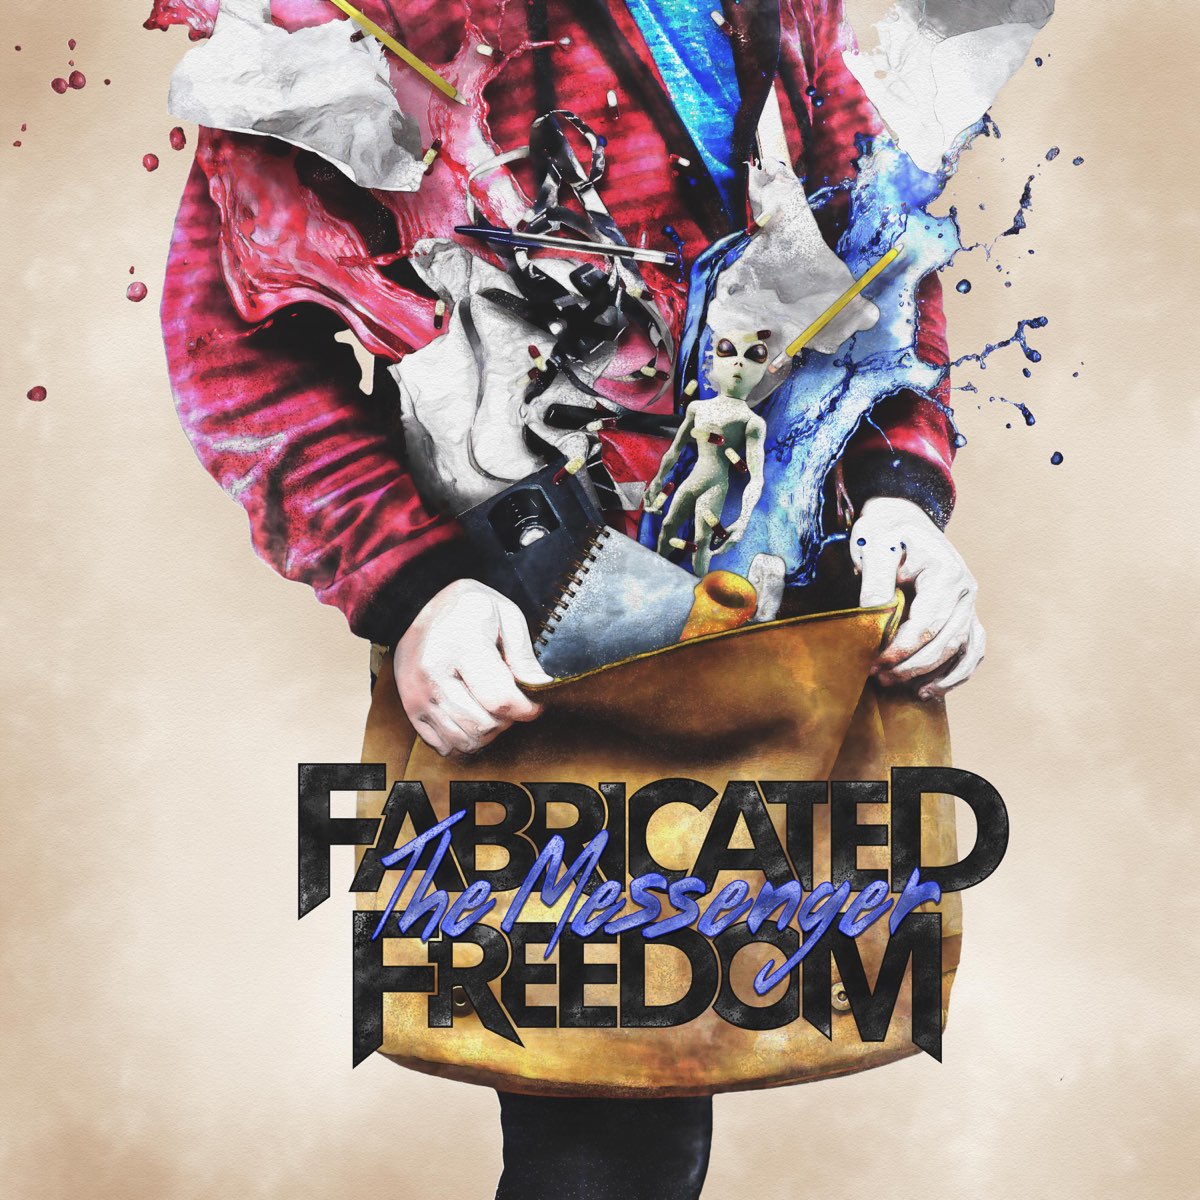 The only freedom. Fabricated.